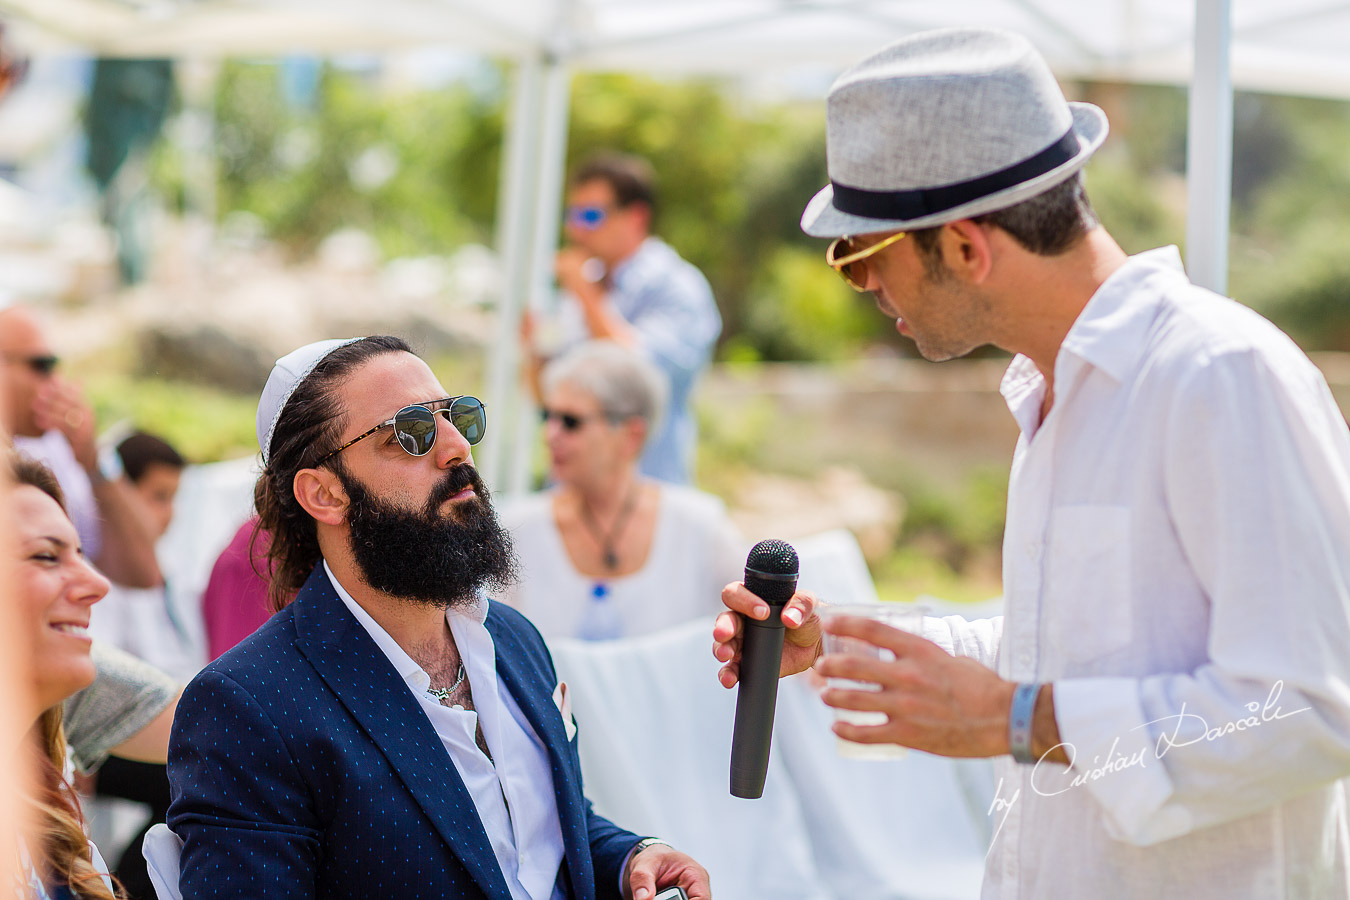 Moments before a Jewish Wedding Ceremony in Cyprus.